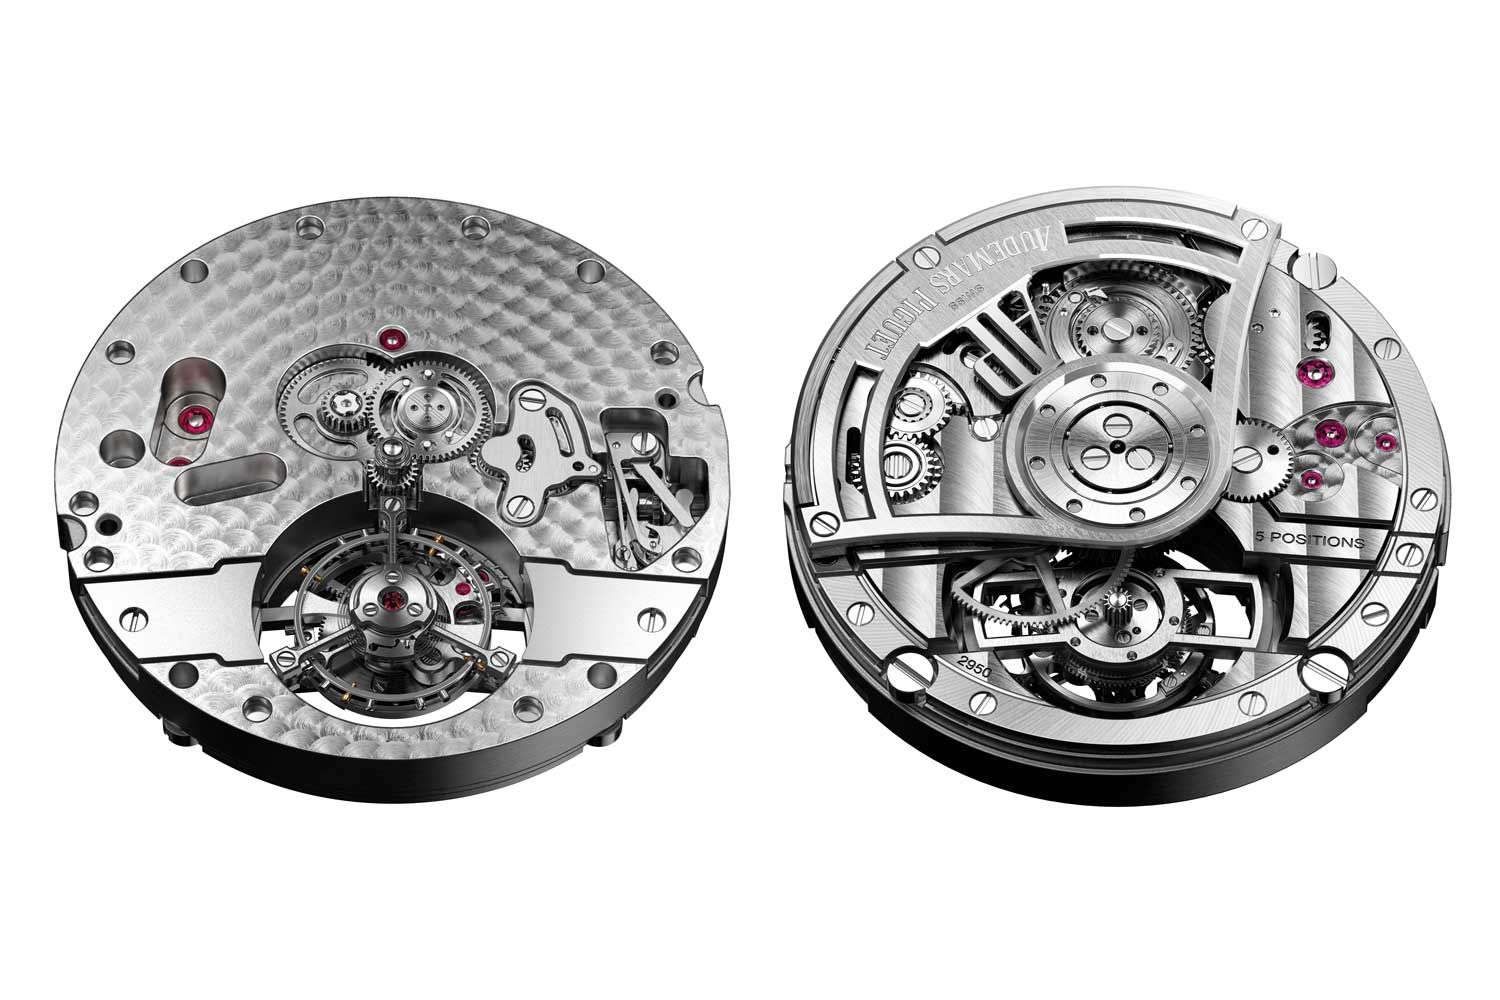 Front and back view of the caliber 2950 — note that the motion works are located above the central axis of the movement, ensuring that there are no wheels obstructing the view of the tourbillon cage at six o’clock